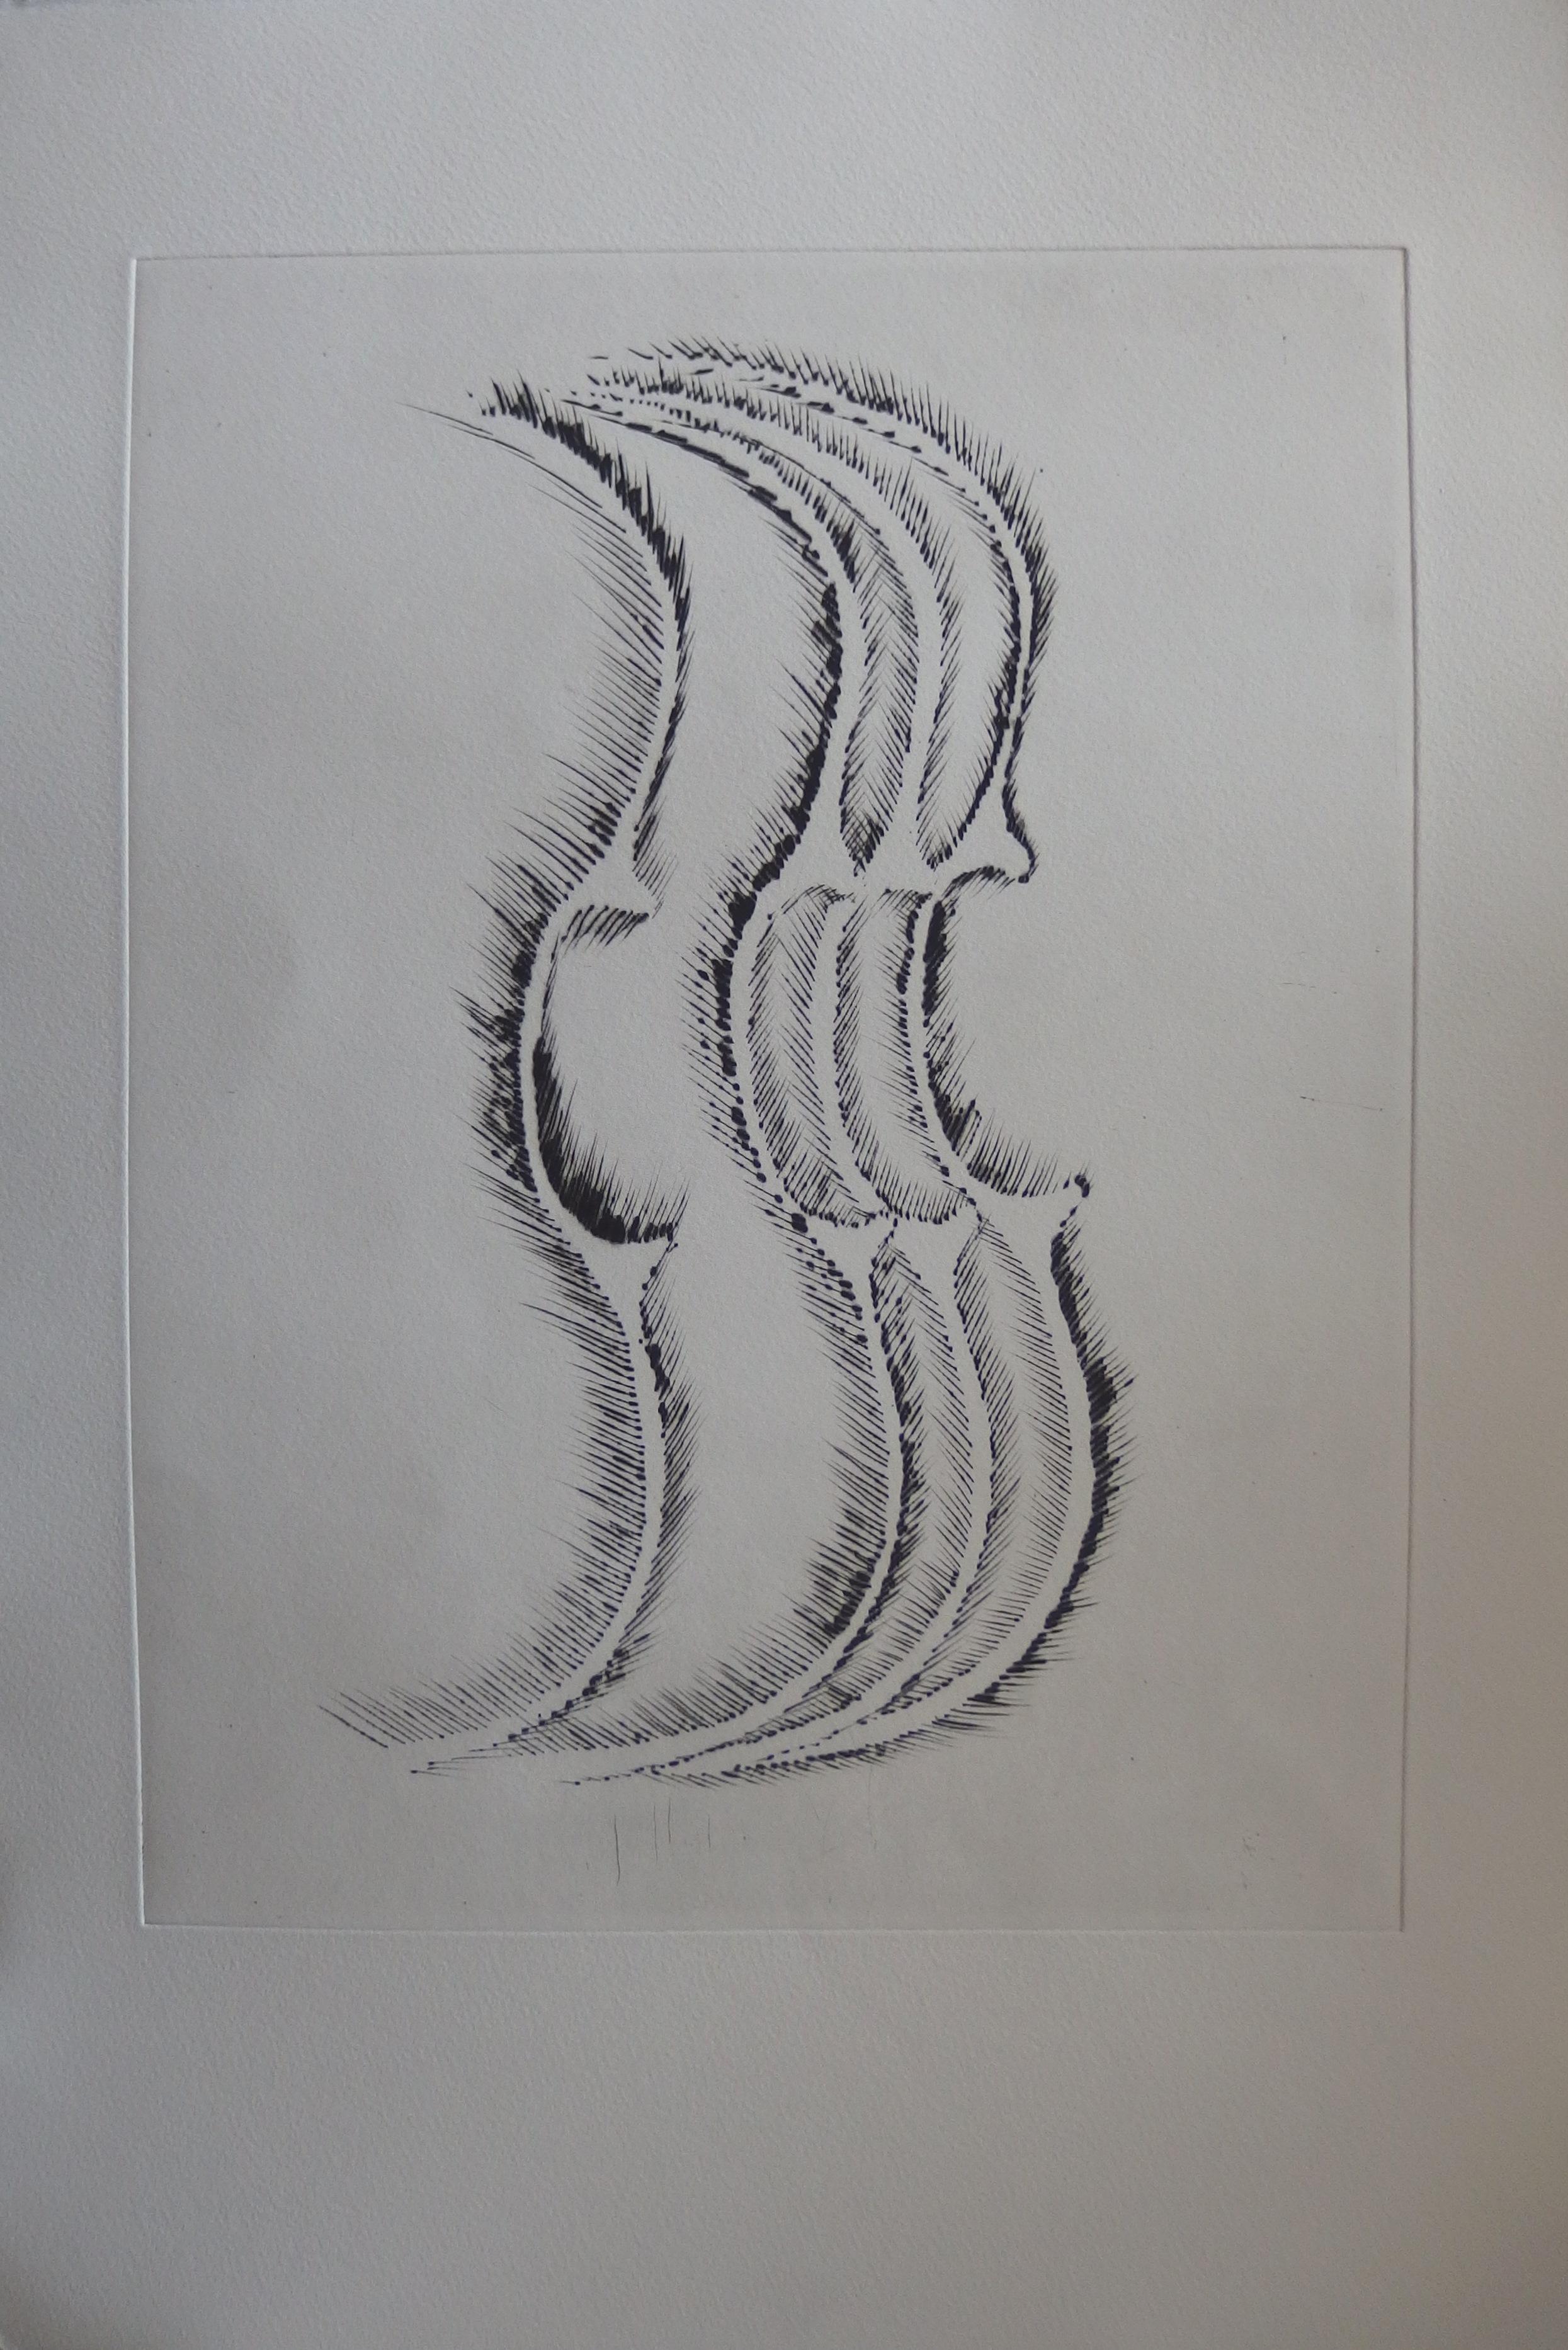 ARMAN Fernandez
Set of 7 etchings (see pictures)

Original Drypoint etching
On Arches vellum
23 x 15